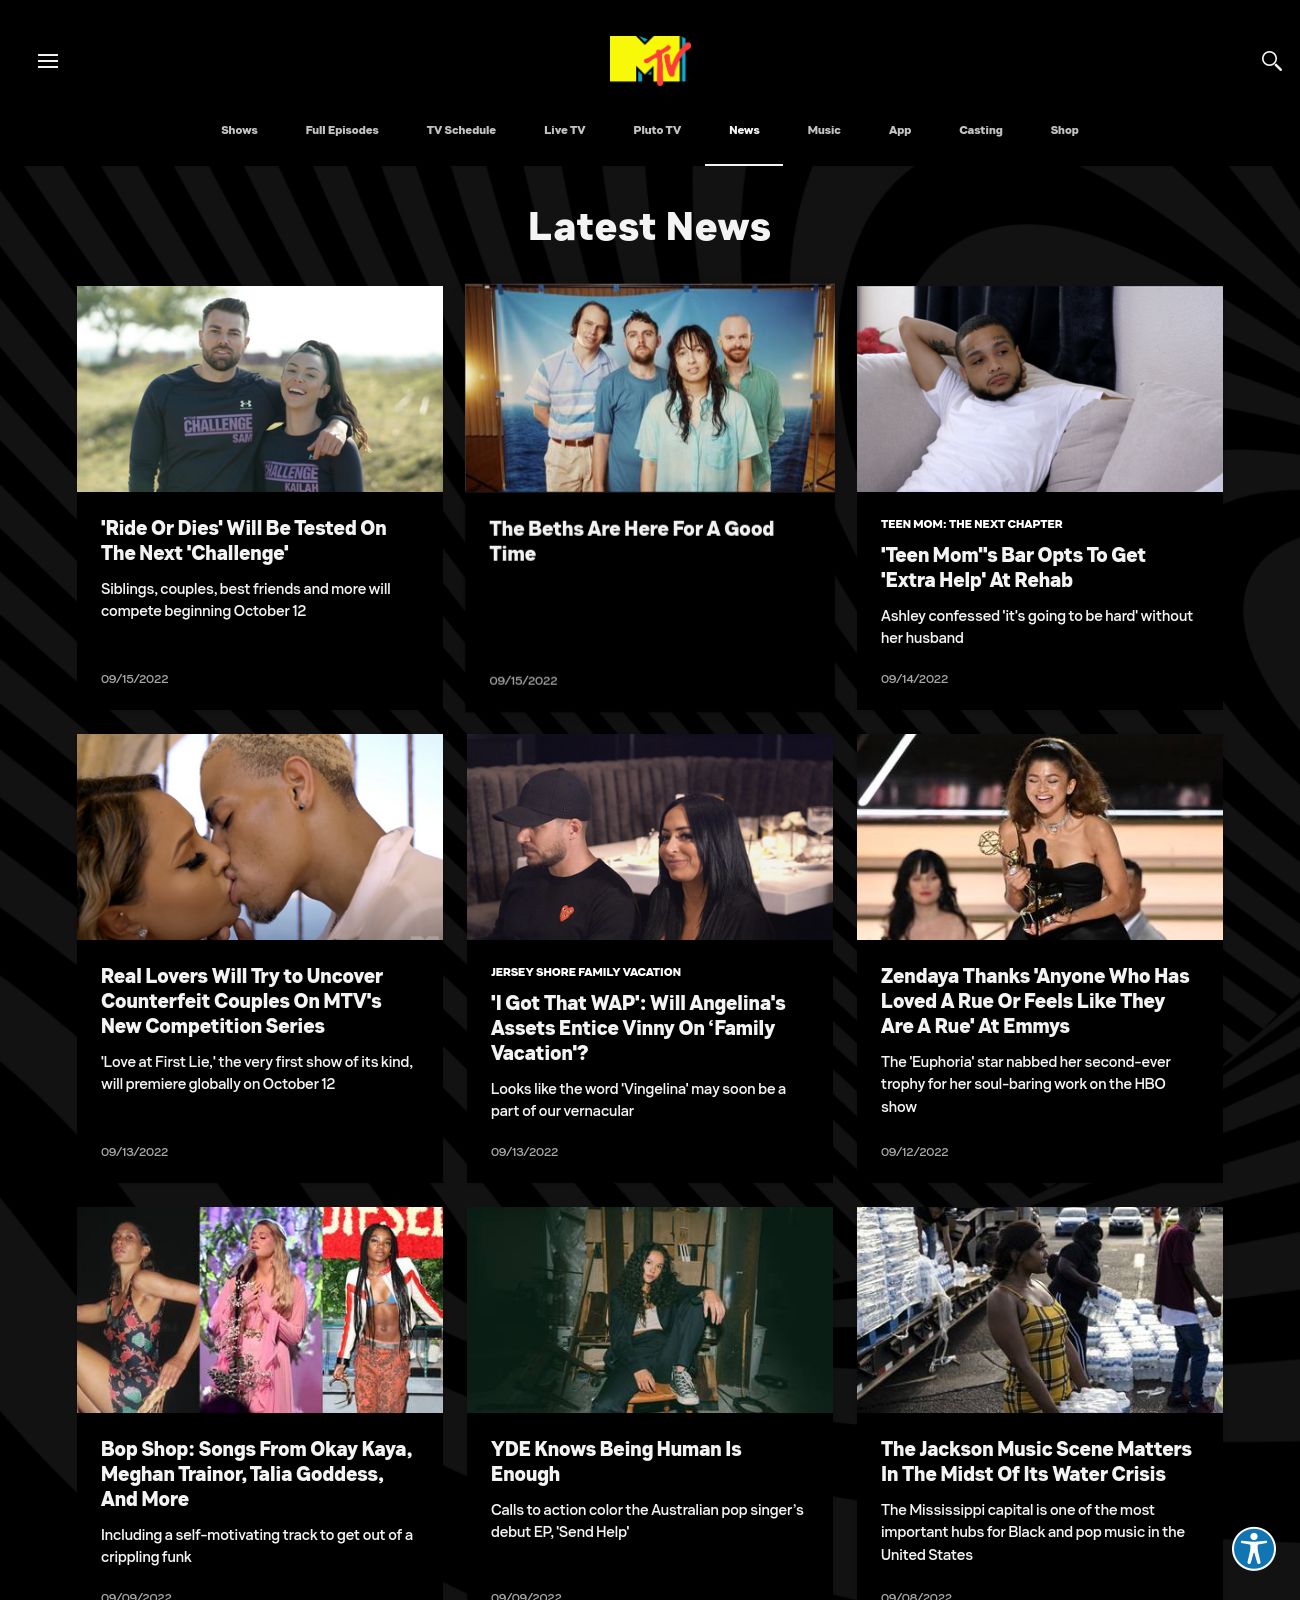 MTV News at 2022-09-15 21:14:14-04:00 local time